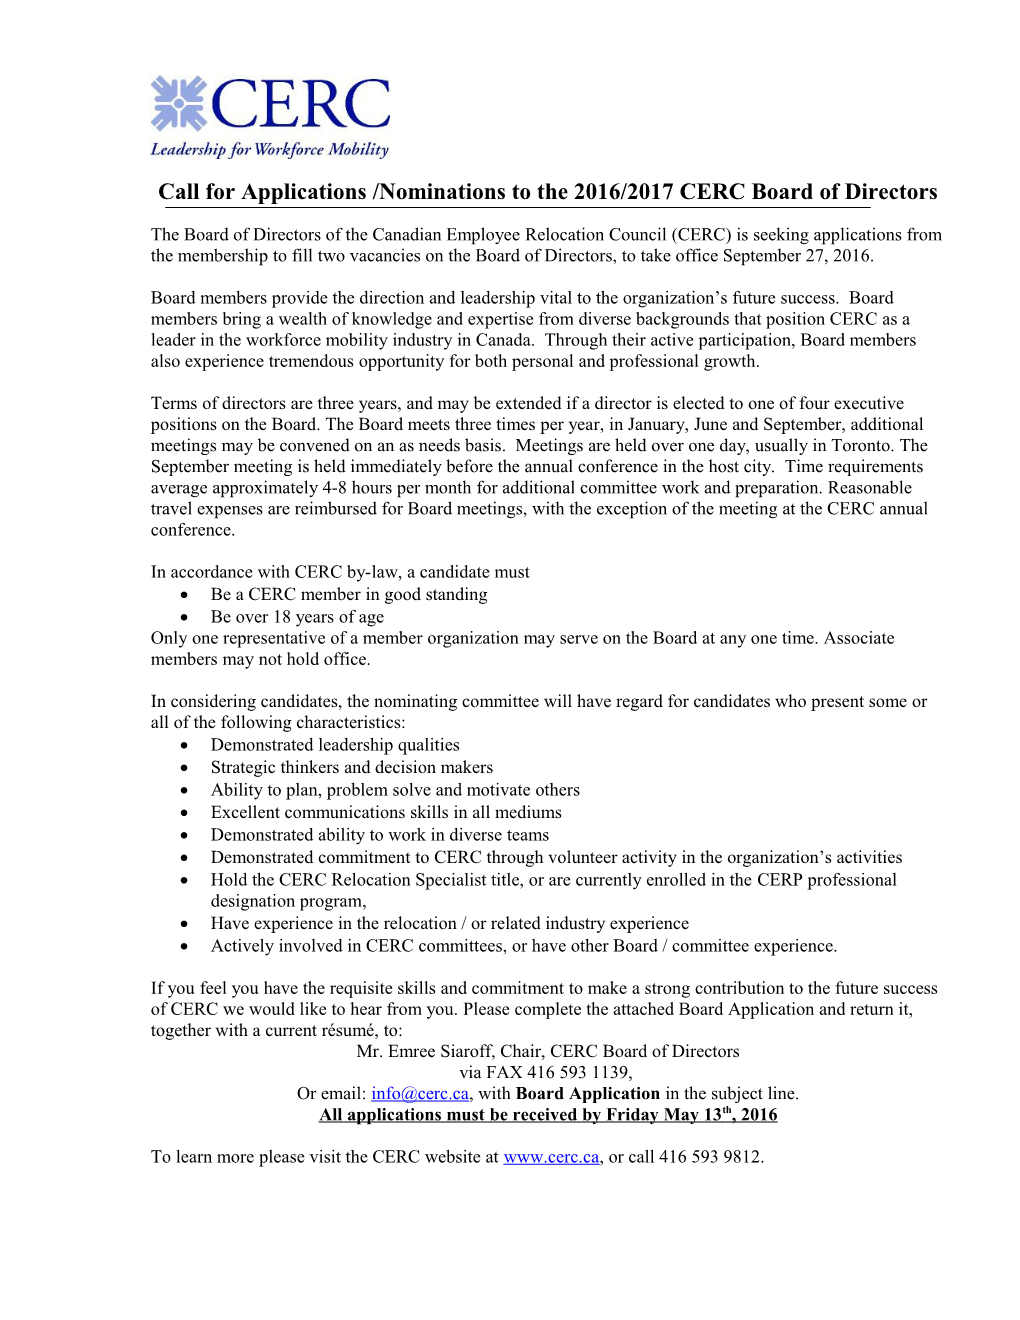 Call for Nominations to the CERC Board of Directors